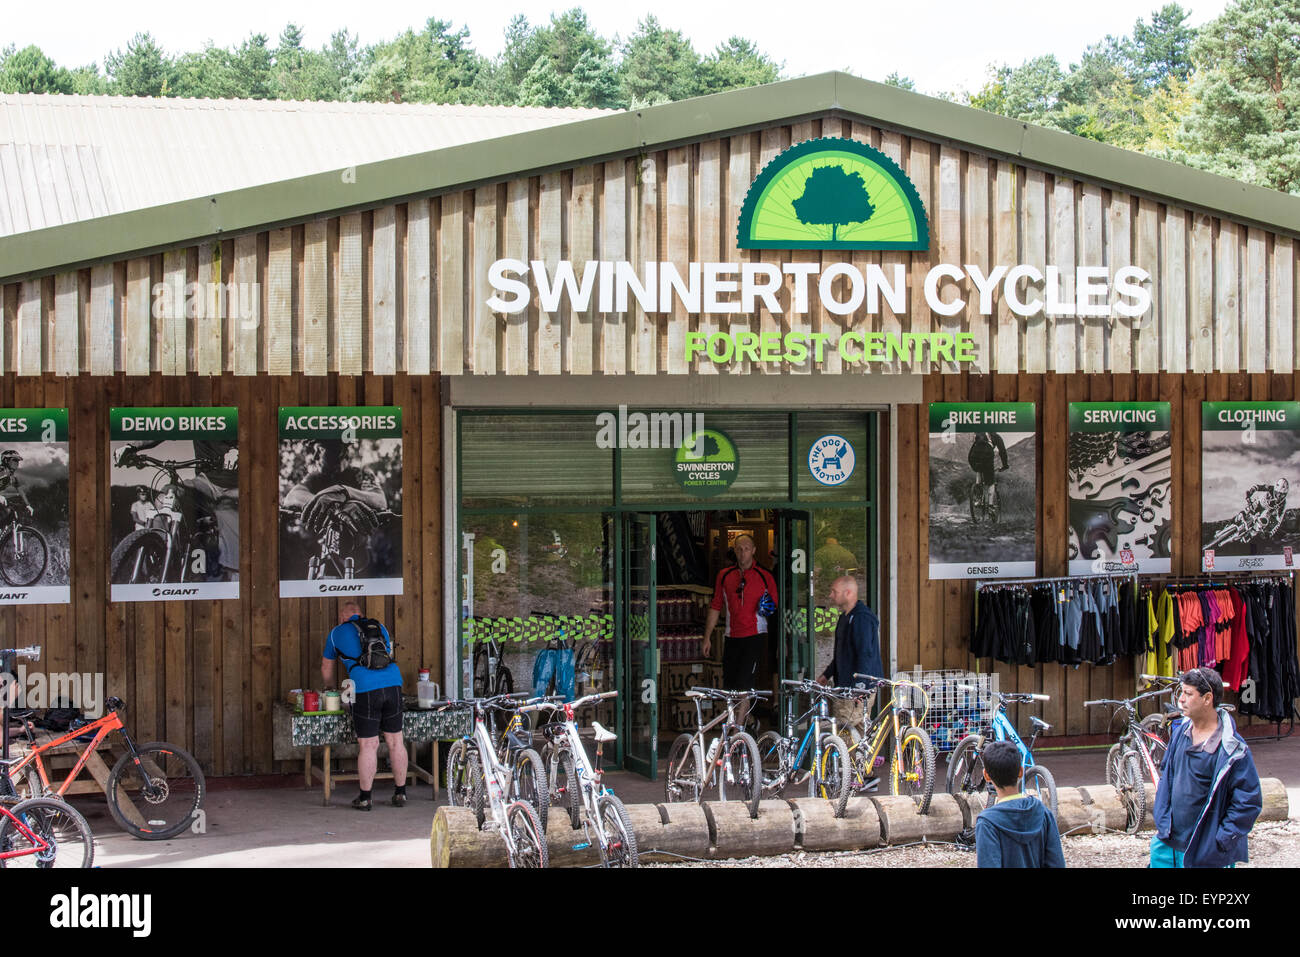 Cycle hire shop at Go Ape activity centre cannock chase Staffordshire West Midlands UK Stock Photo